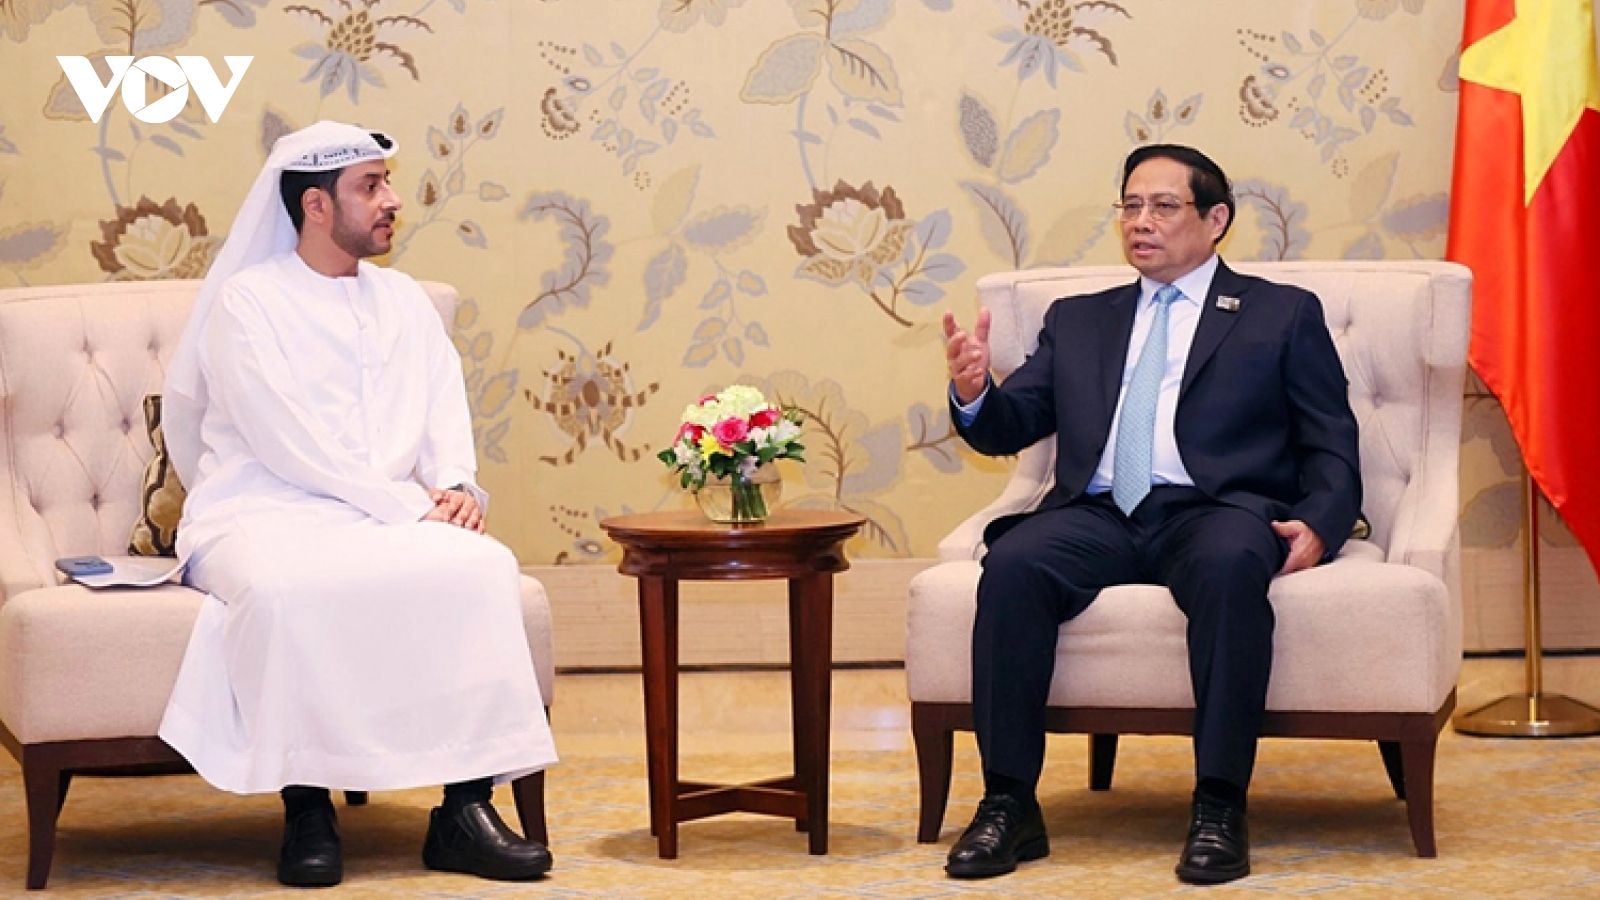 Leading UAE economic groups seek to expand investment in Vietnam